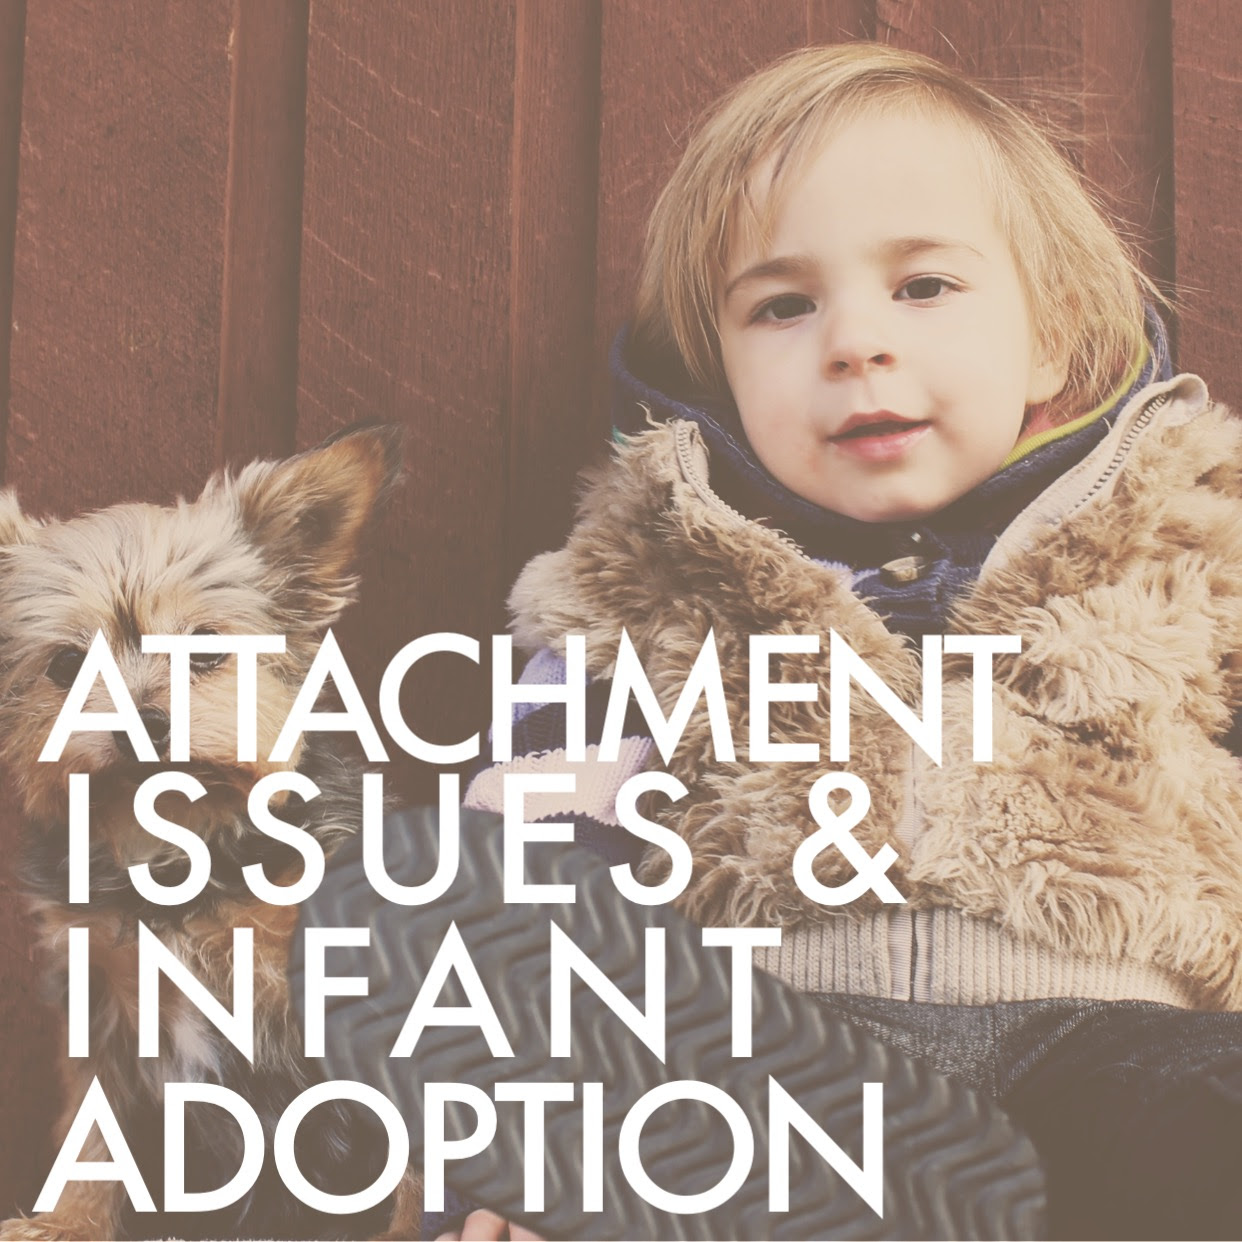 Attachment issues and Infant Adoption